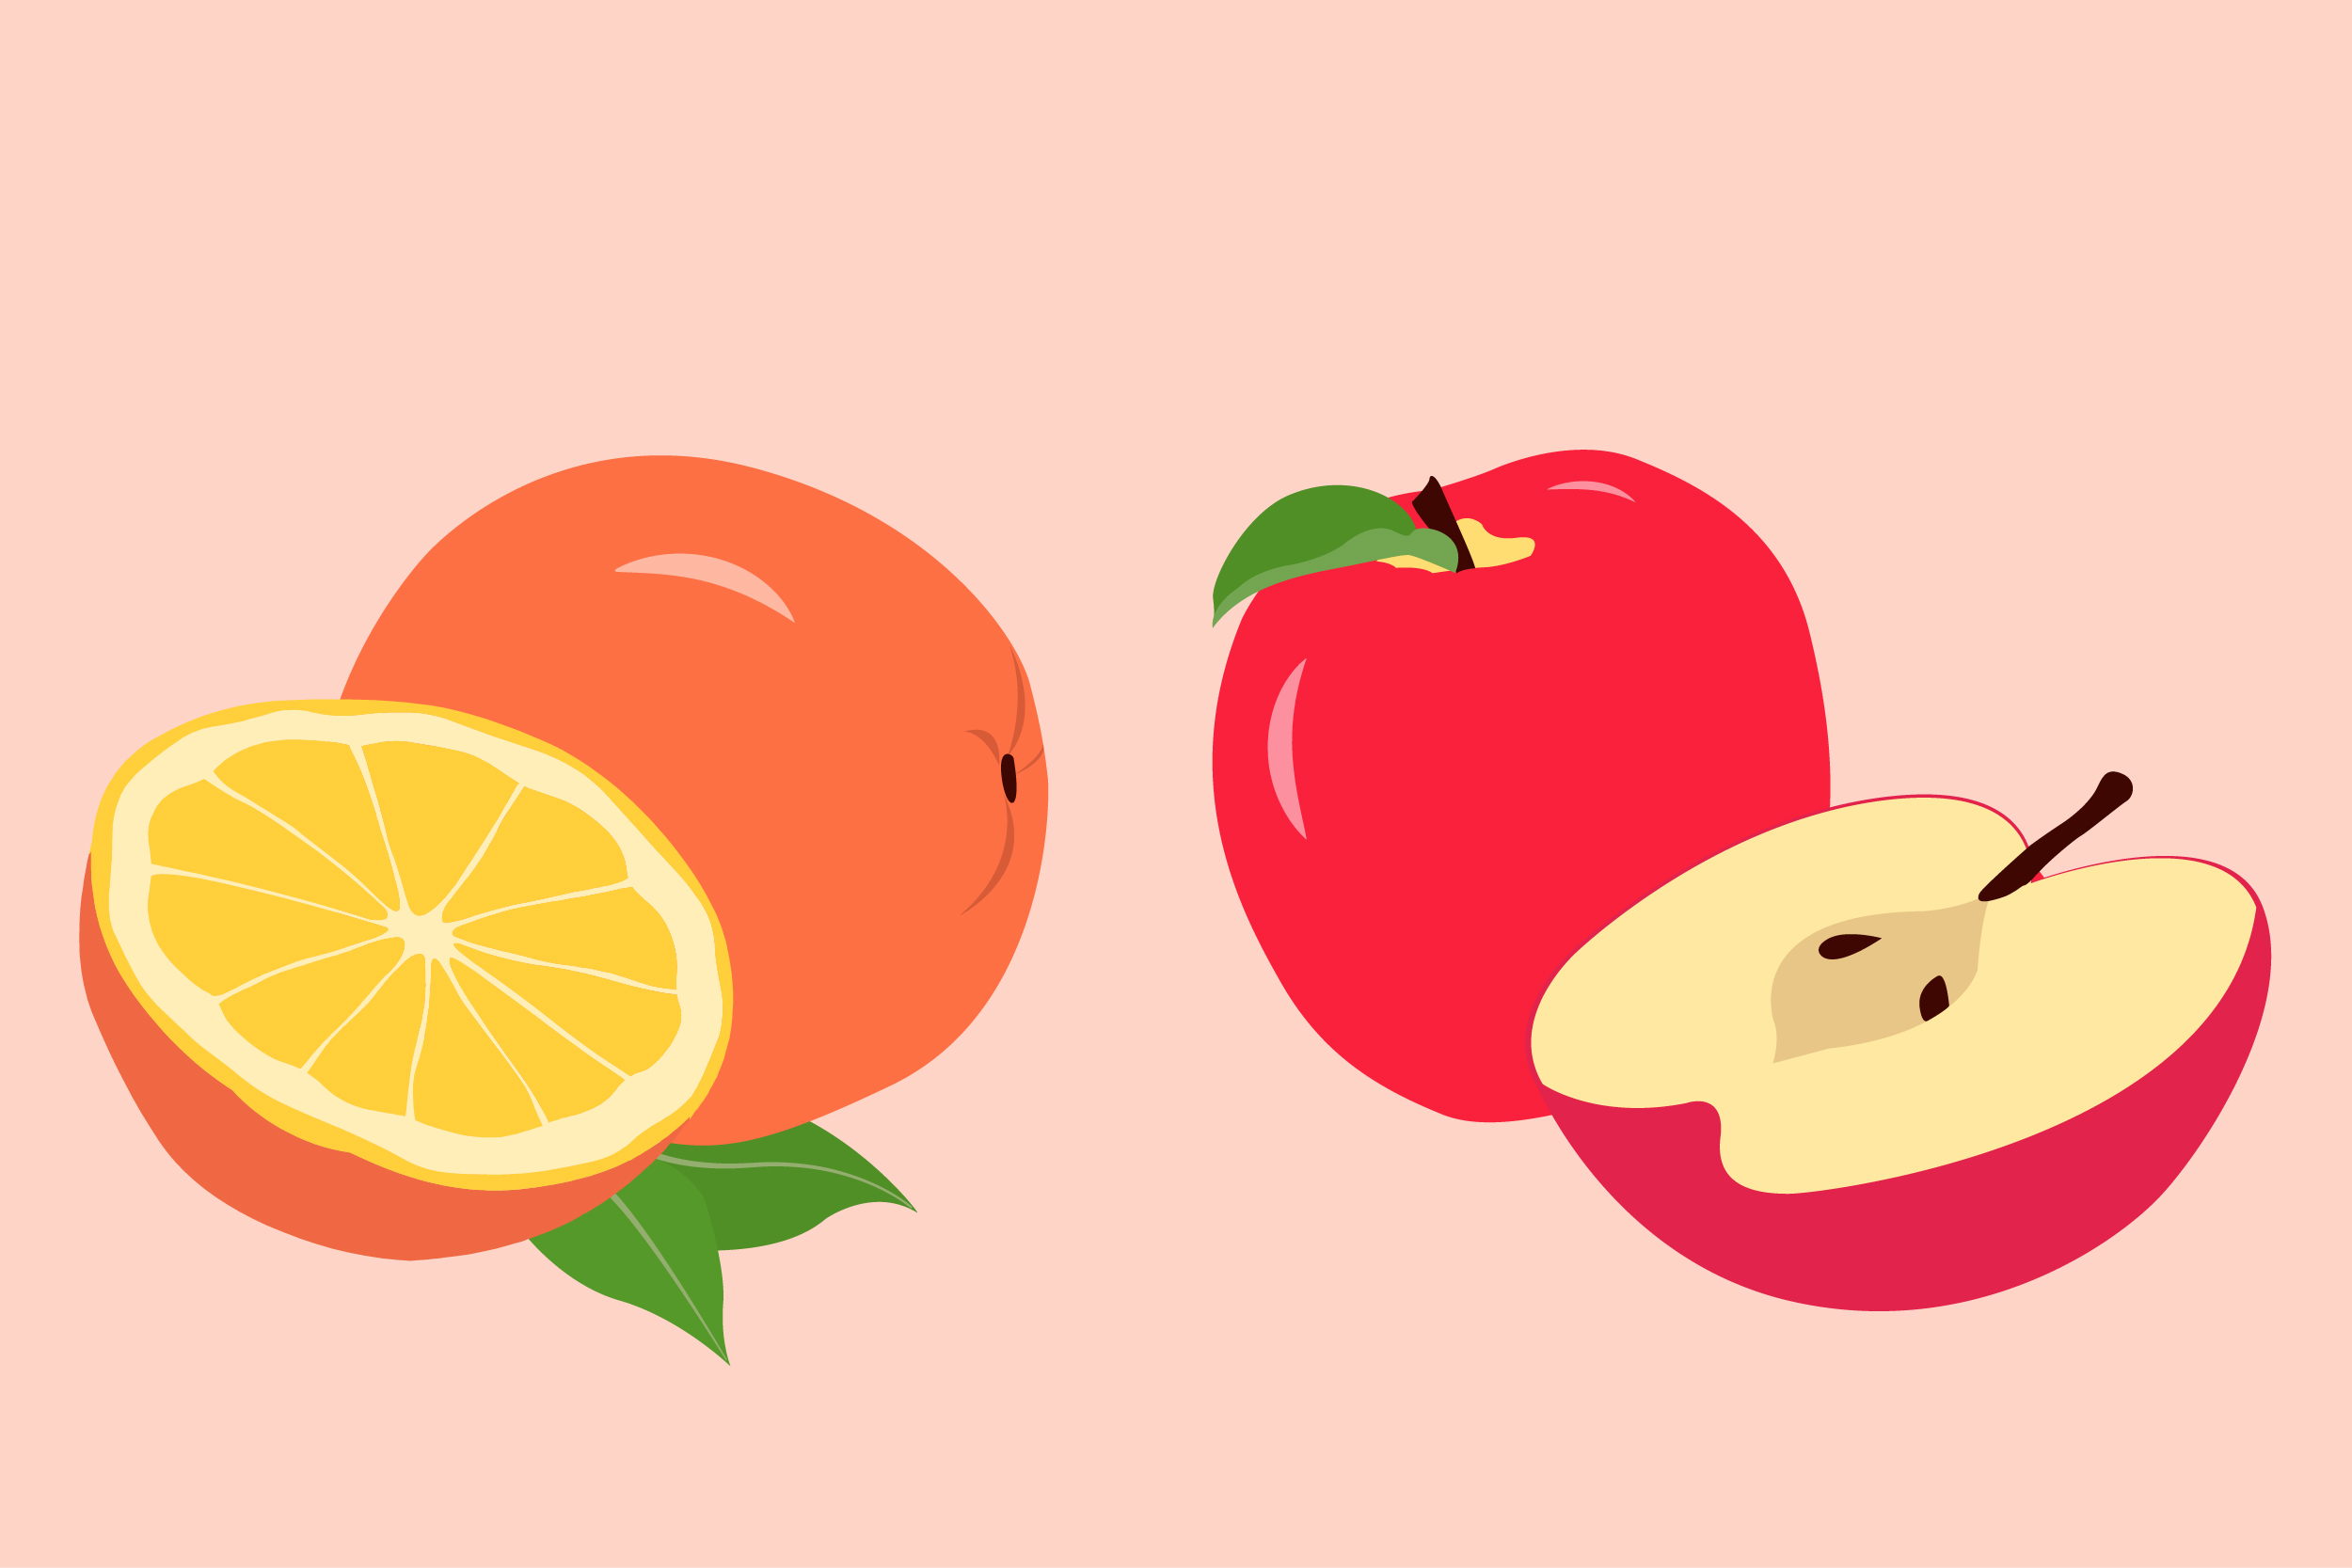 Are Apples Or Oranges Healthier?